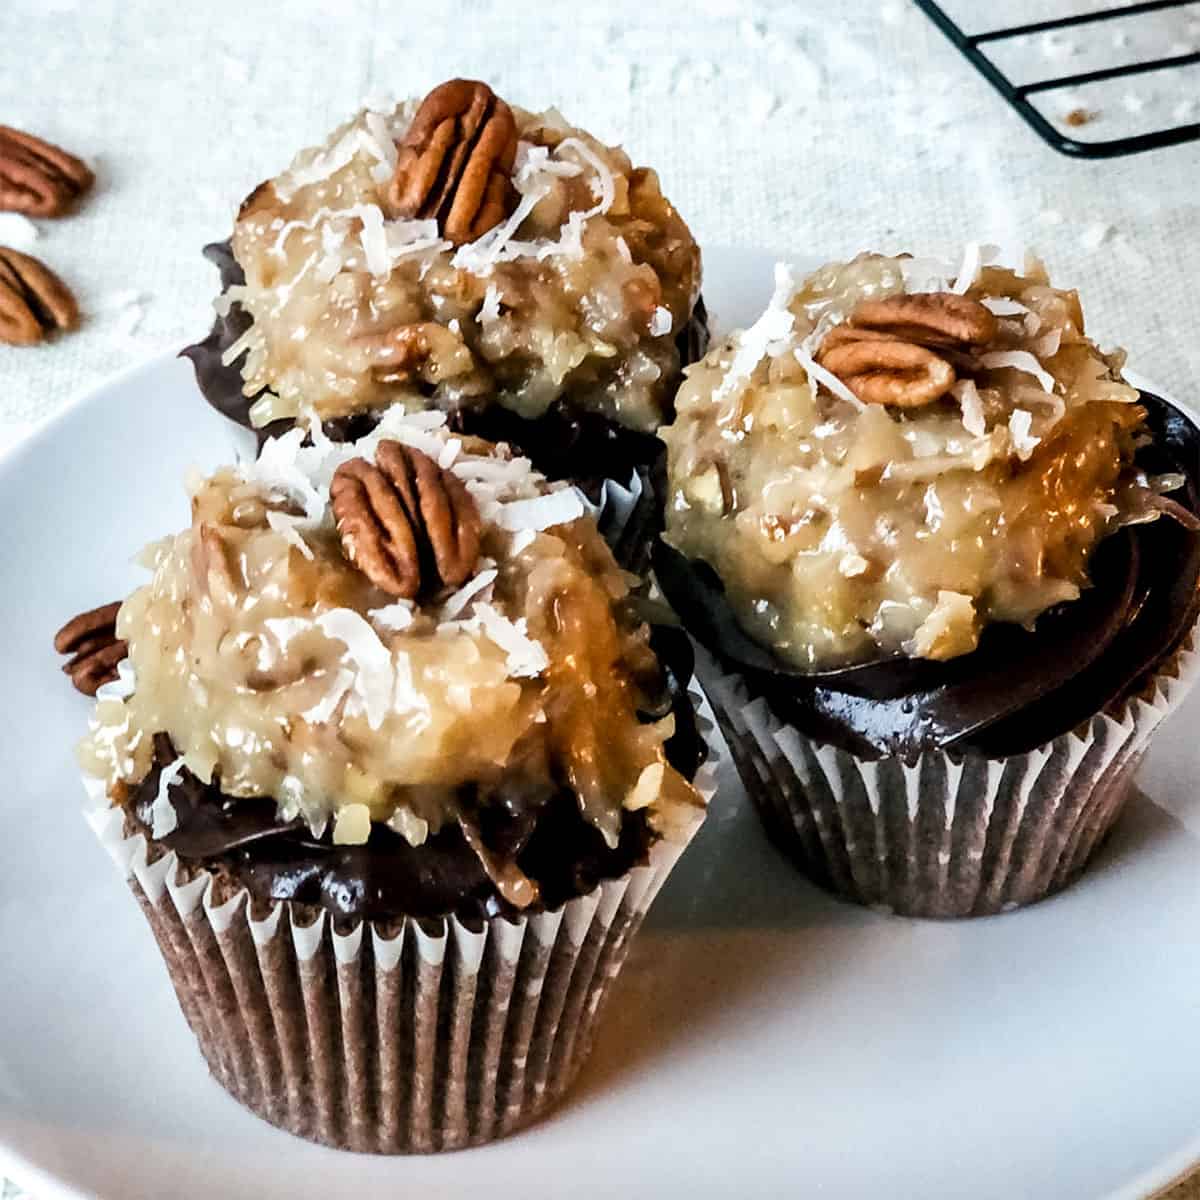 Three German chocolate cake cupcakes with chocolate ganache and coconut pecan topping.